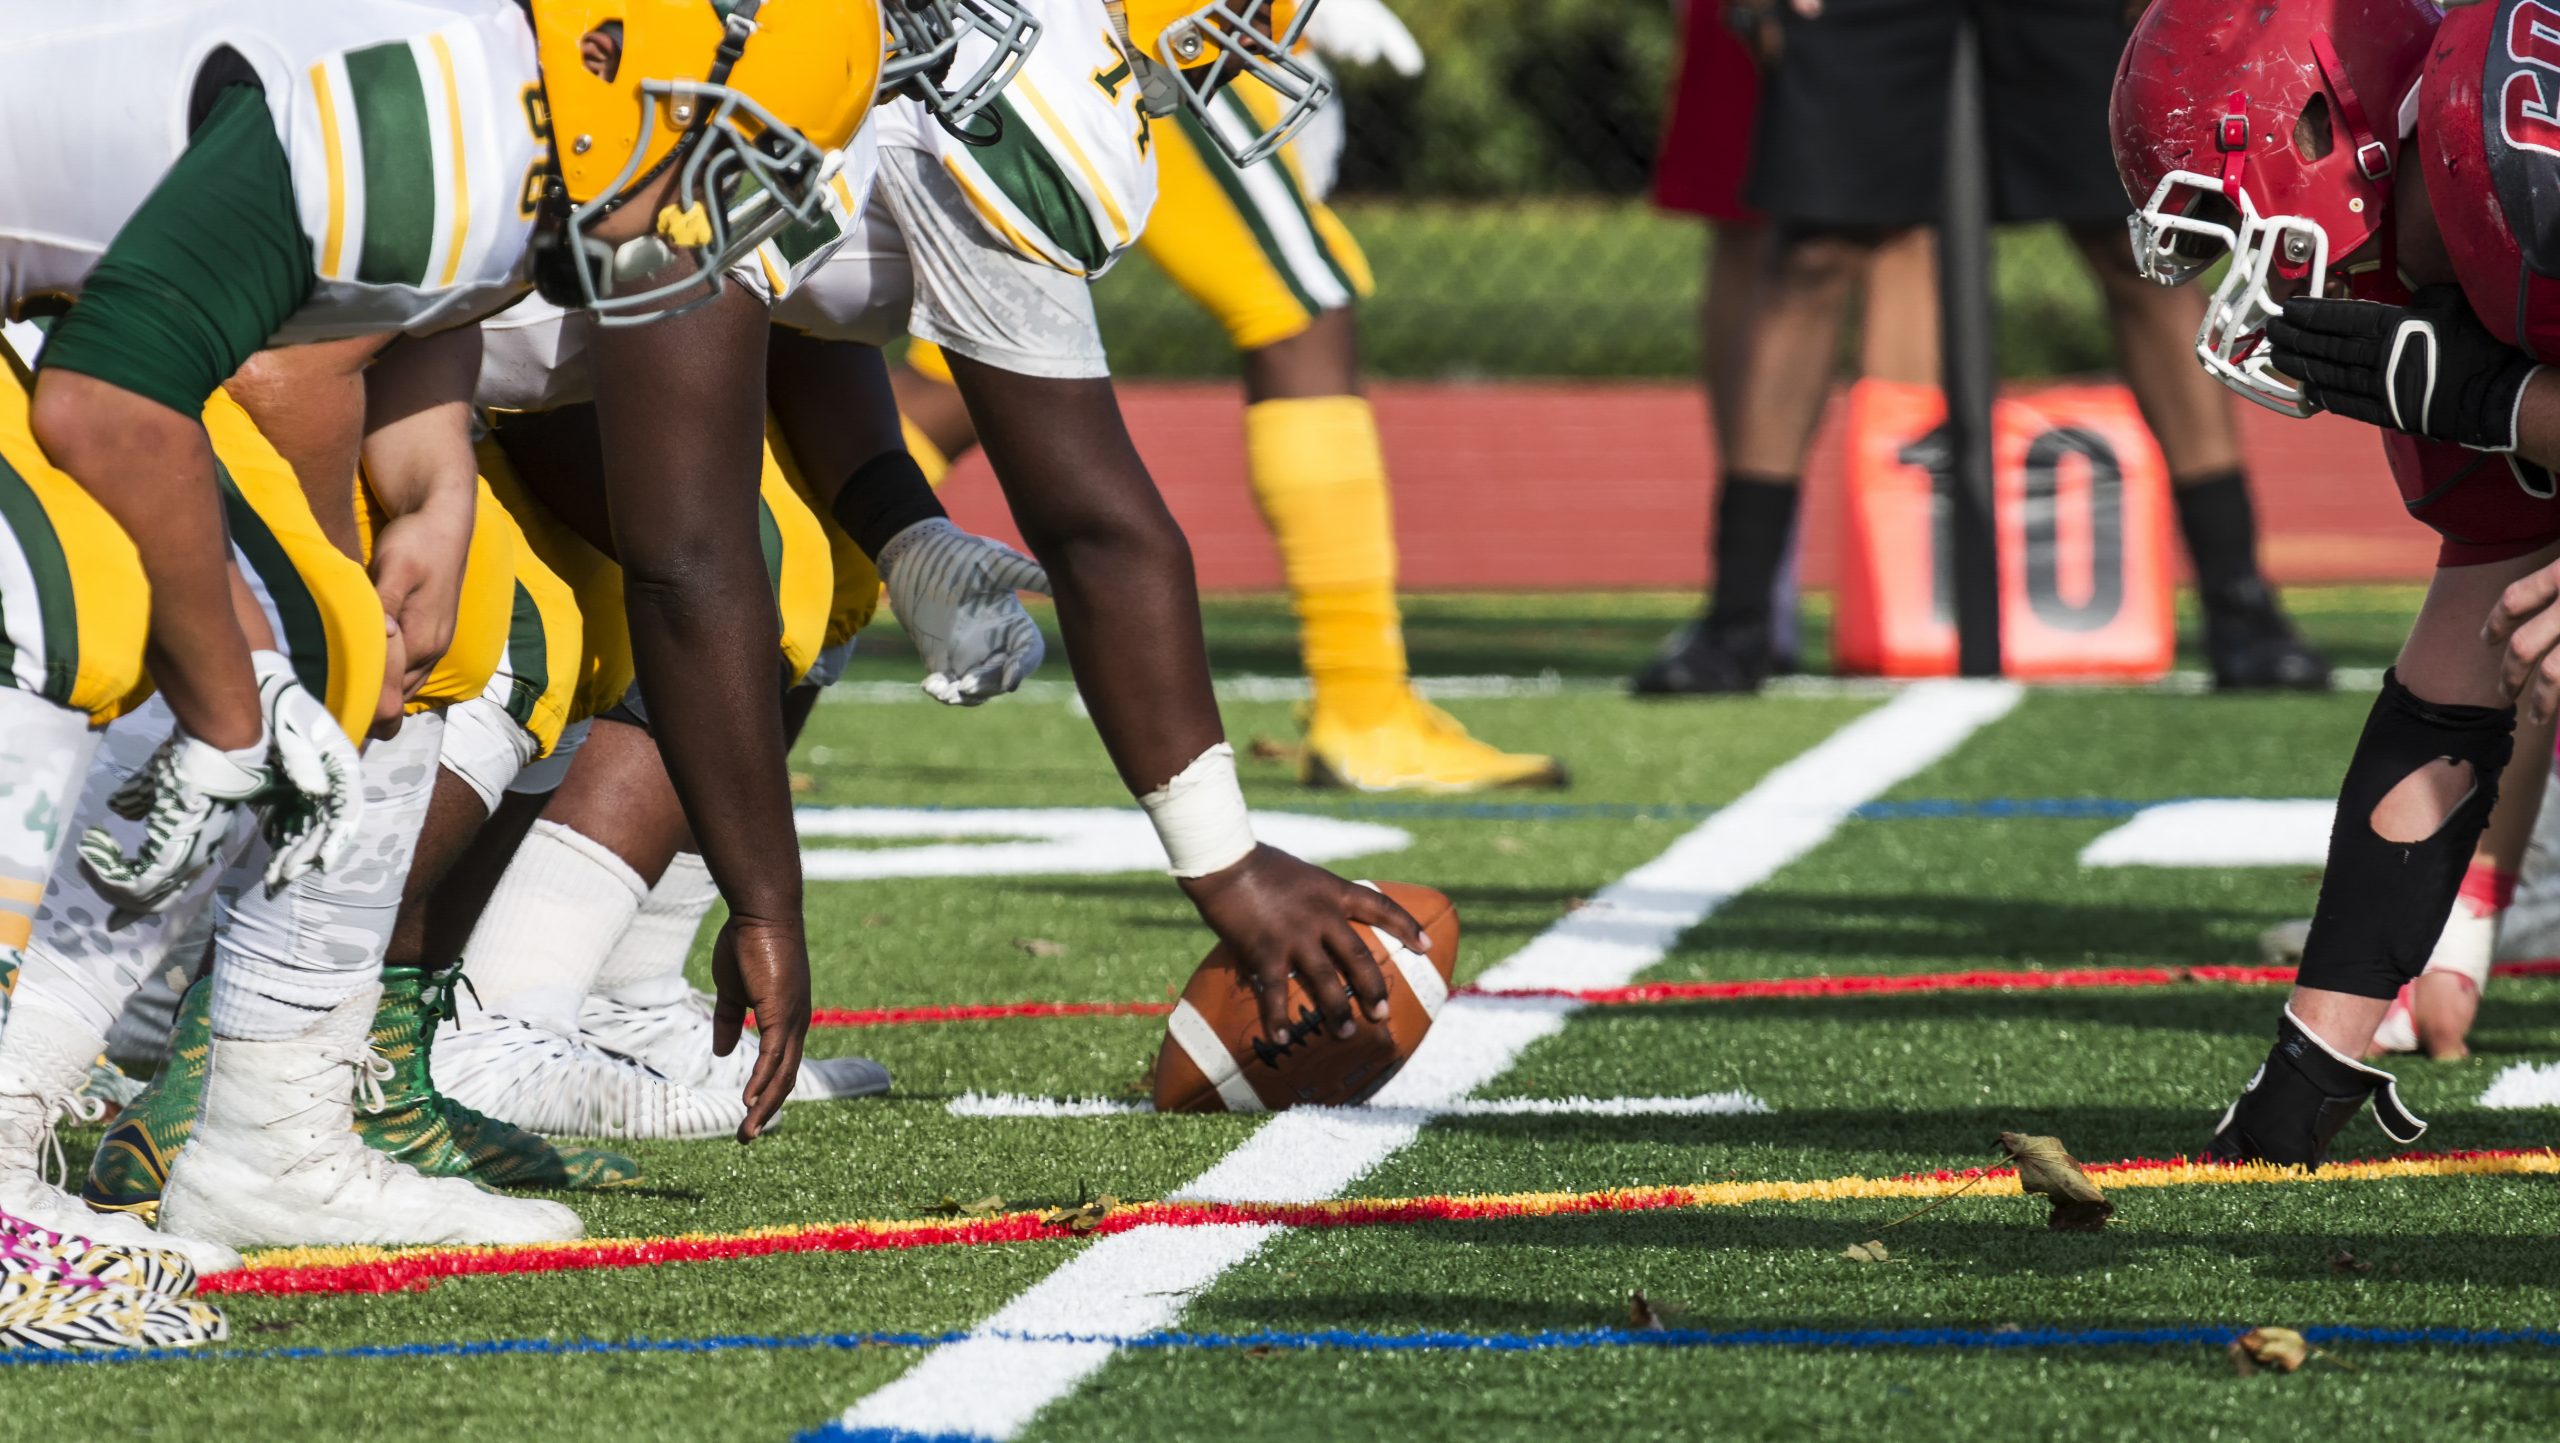 Nationwide Drop in Youth Football Participation Linked to Concussion Concerns